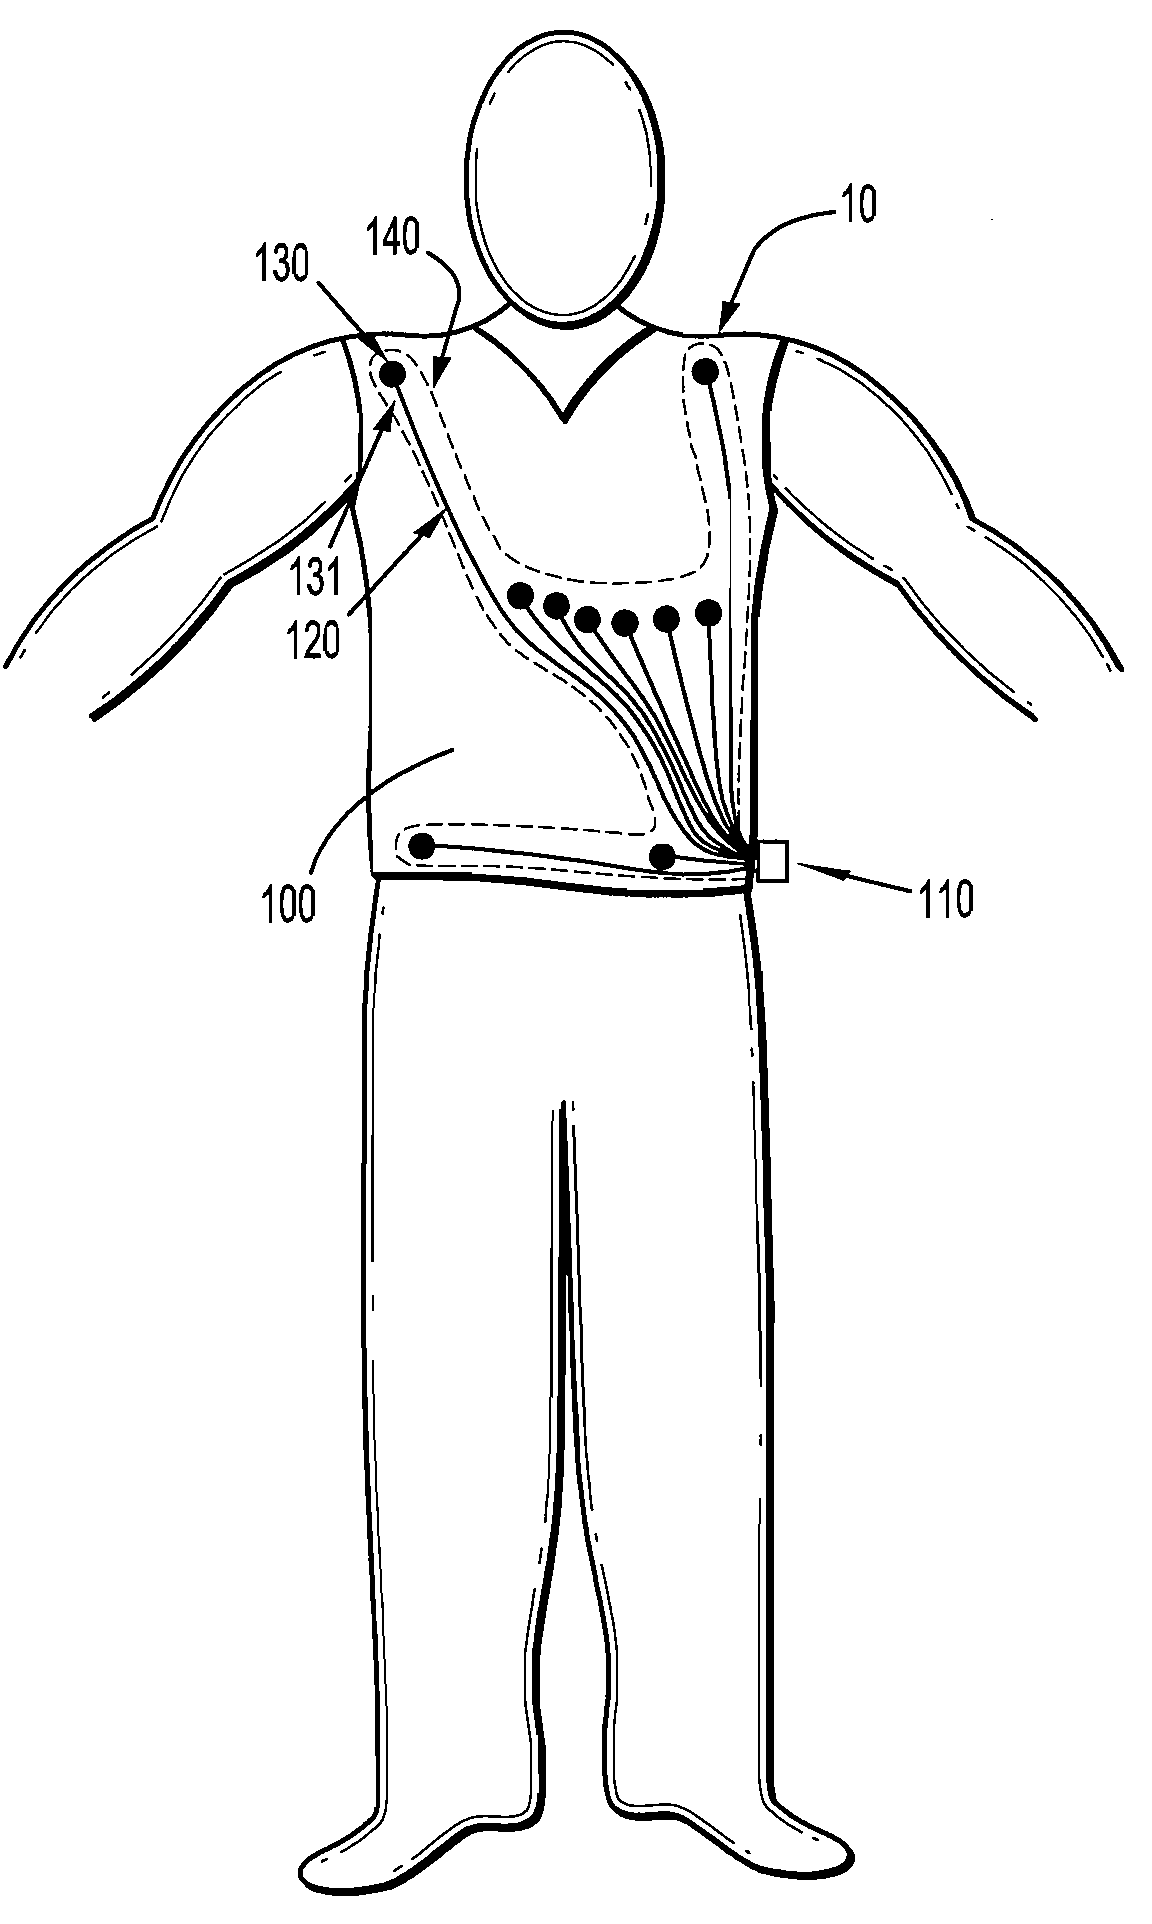 Physiological sensor placement and signal transmission device